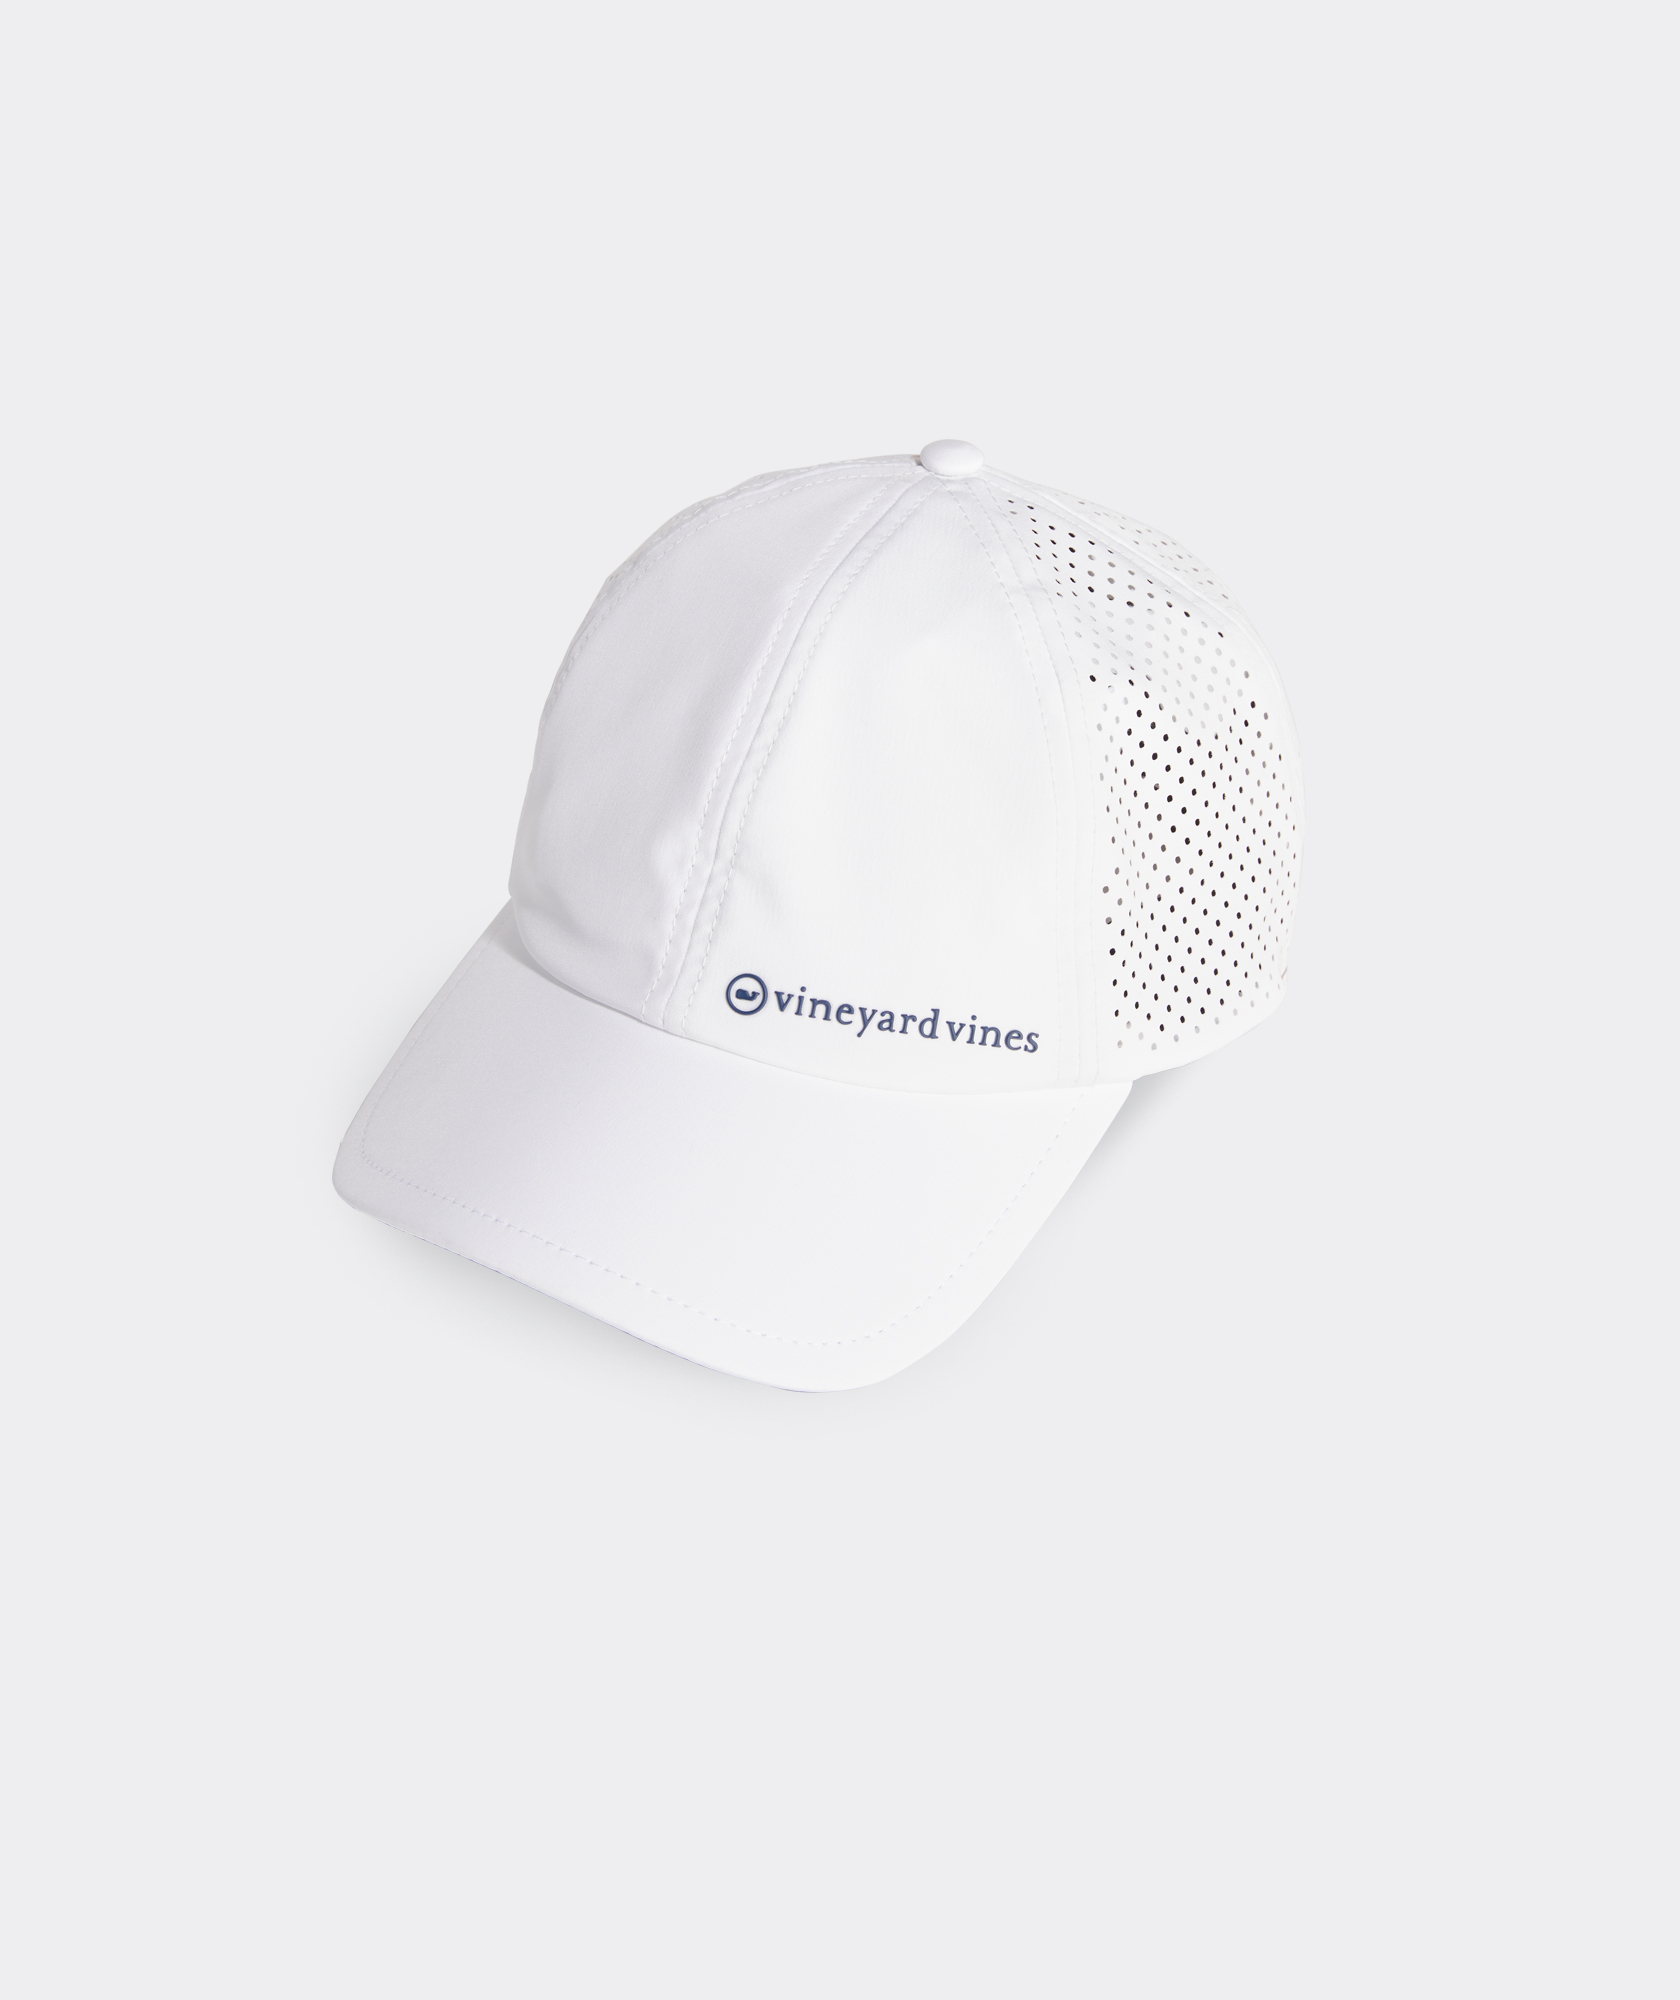 Shop Perforated On-The-Go Baseball Hat at vineyard vines